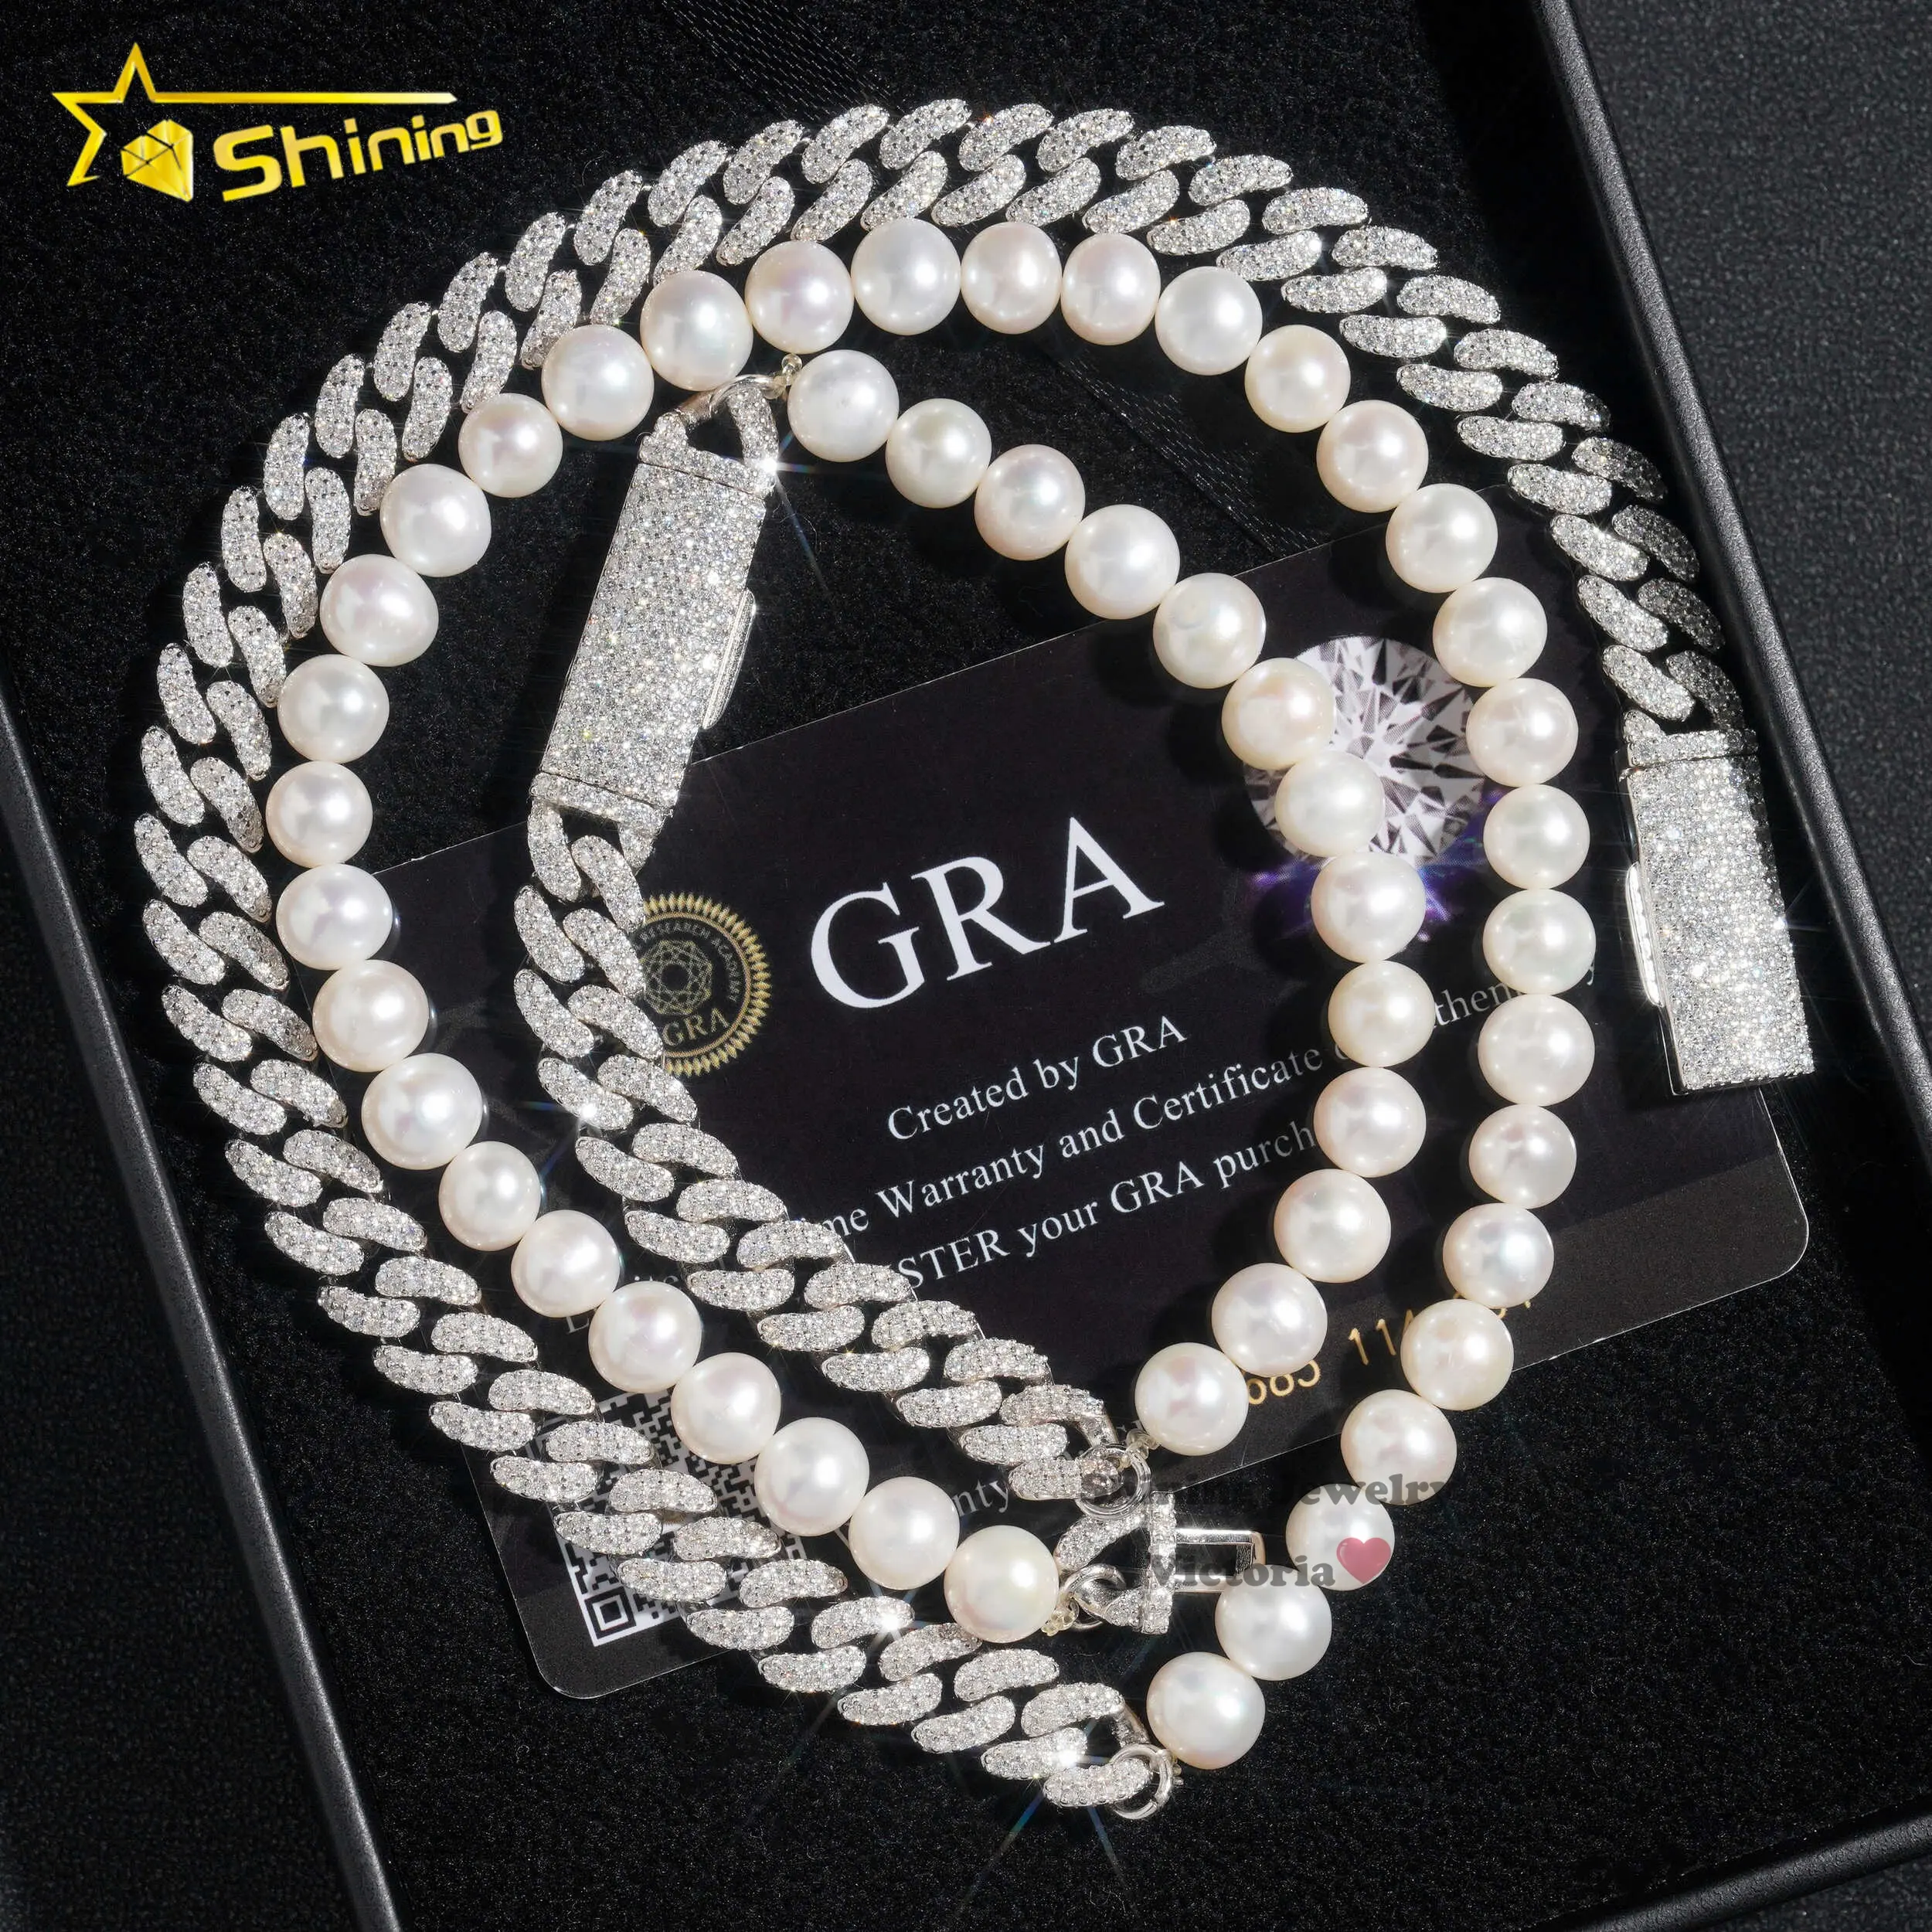 Shining jewelry new design fashion jewelry necklace freshwater pearl with vvs moissanite diamond cuban link chain 10mm